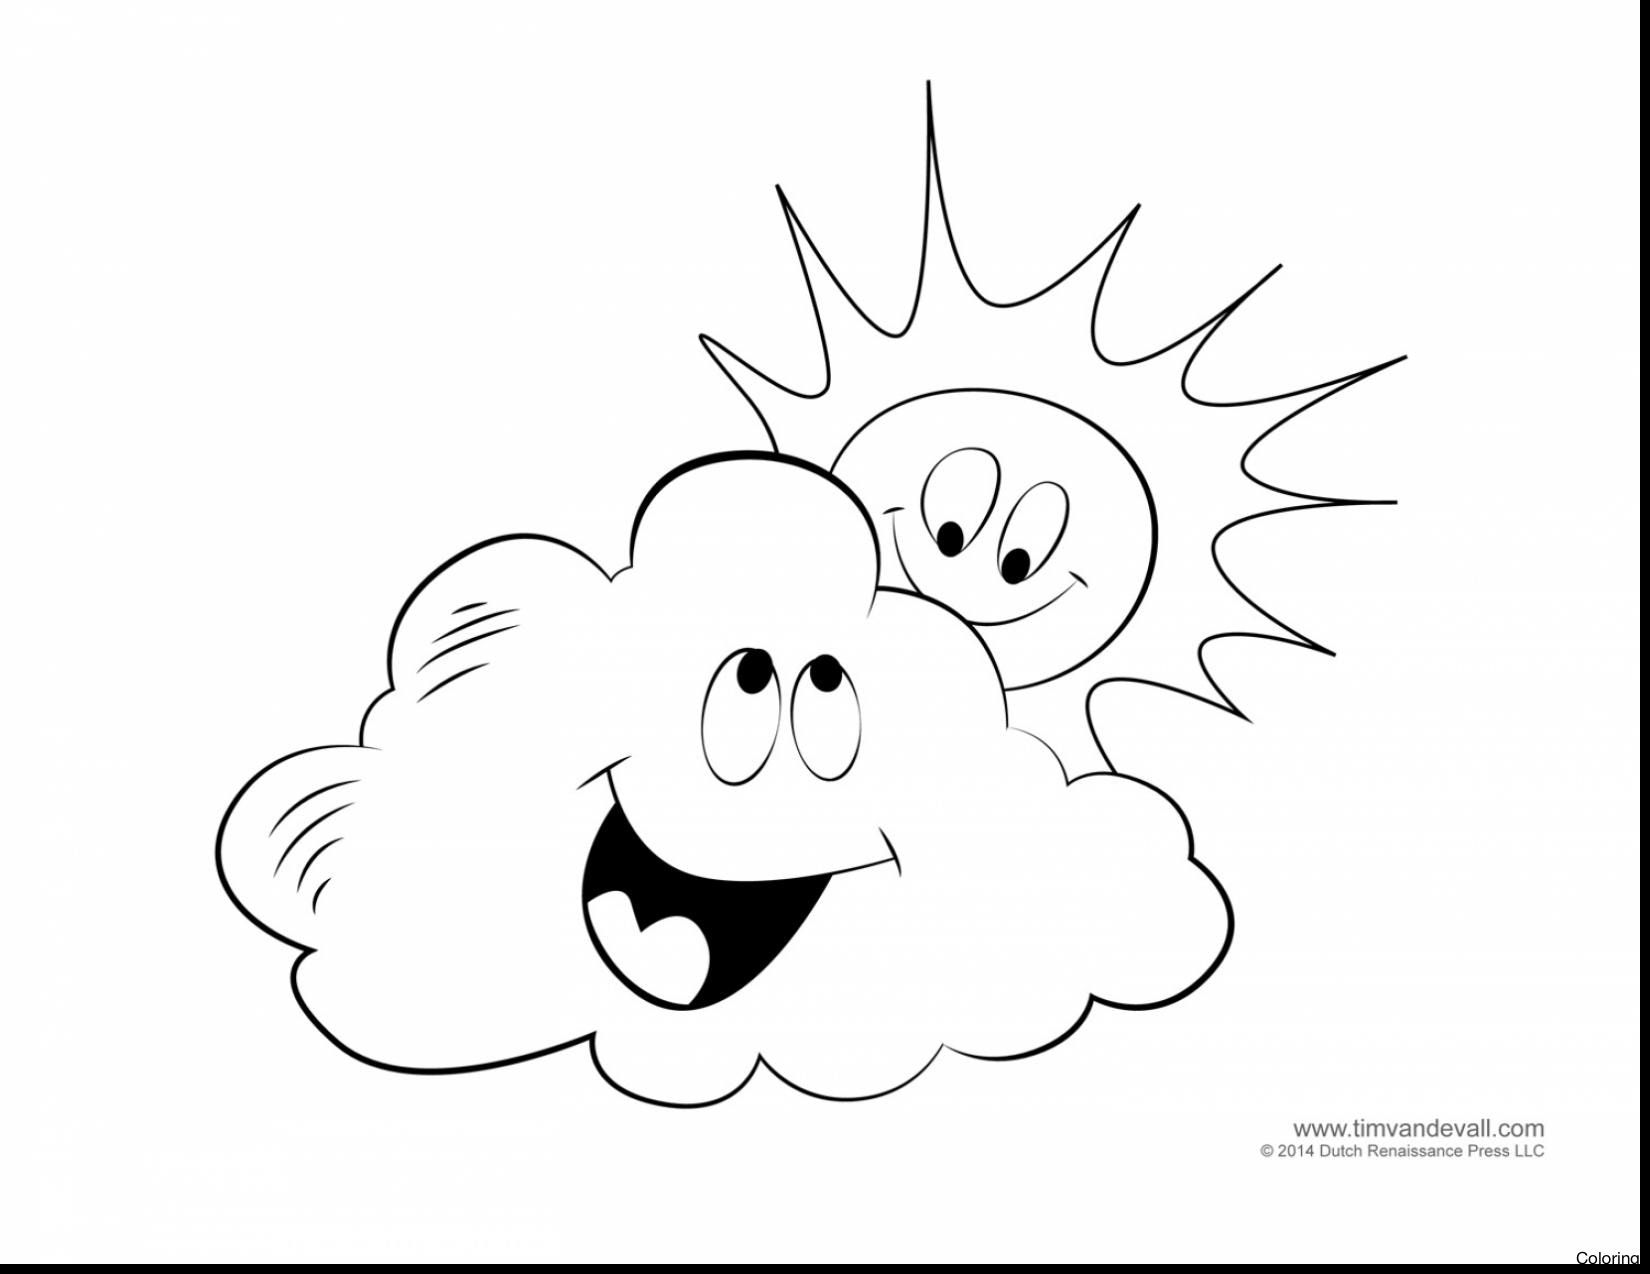 Cloudy Day Coloring Pages - Coloring Home